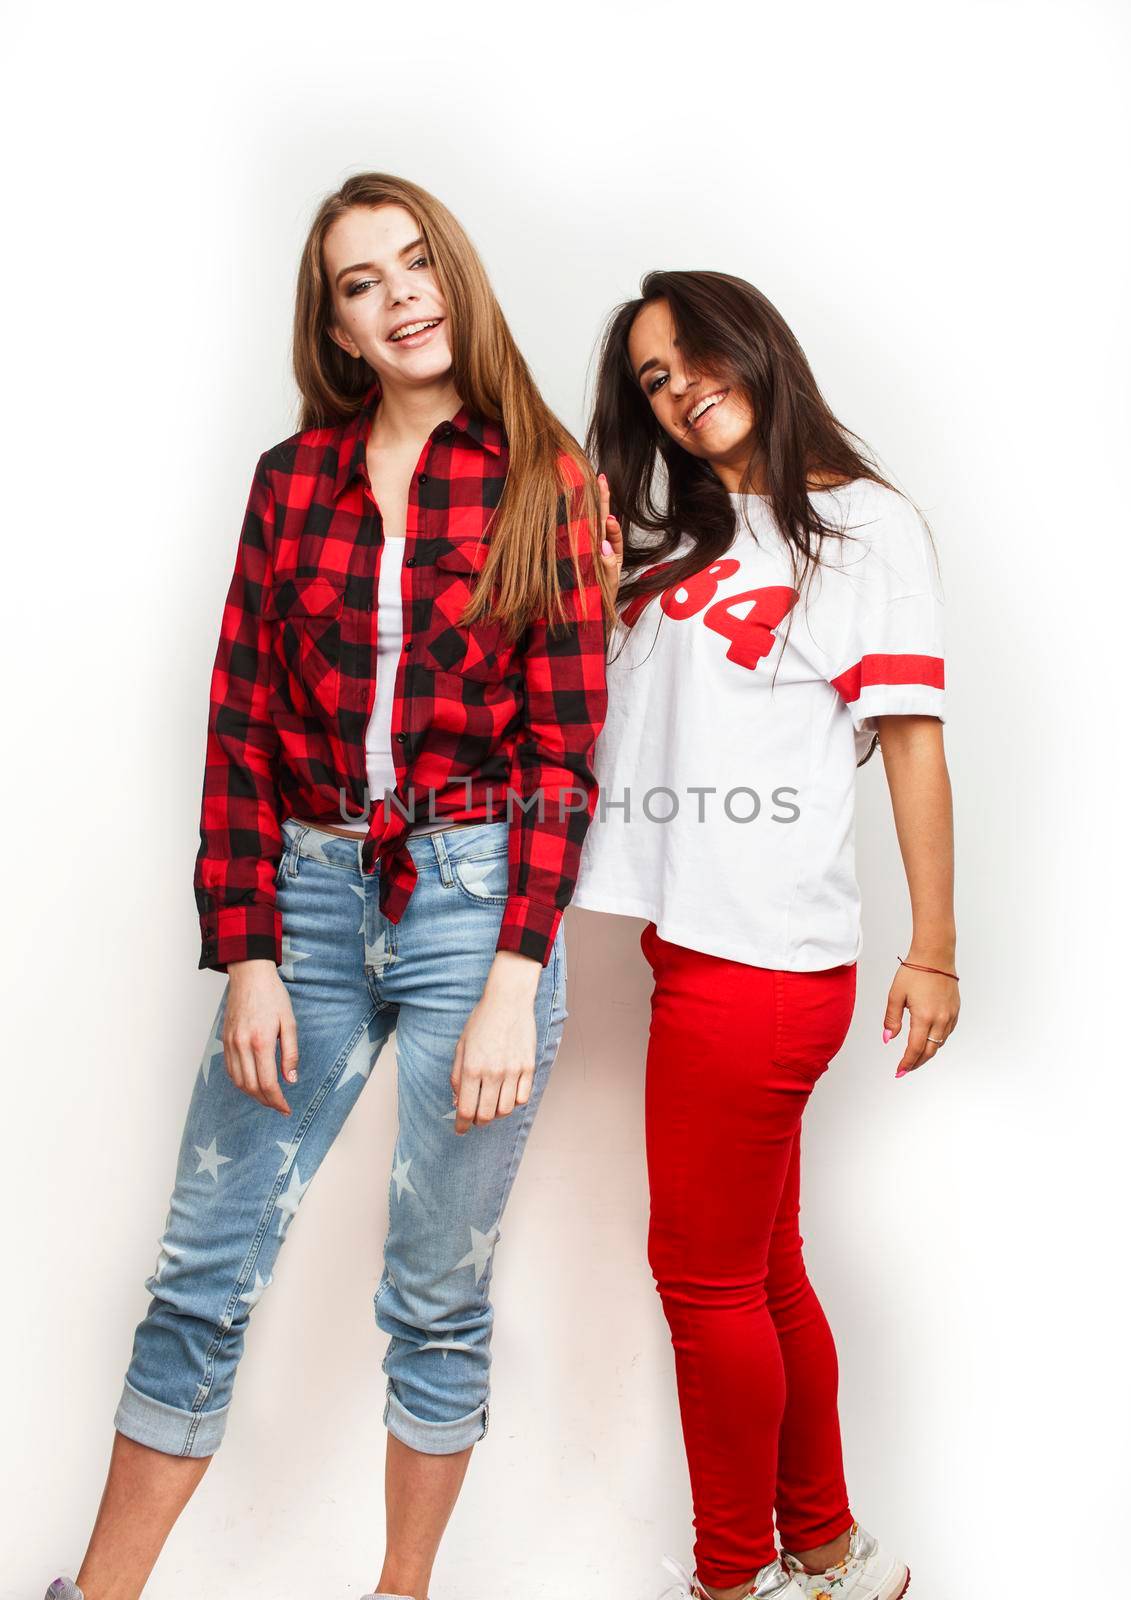 best friends teenage girls together having fun, posing emotional on white background, besties happy smiling, lifestyle people concept, blond and brunette multi nations close up